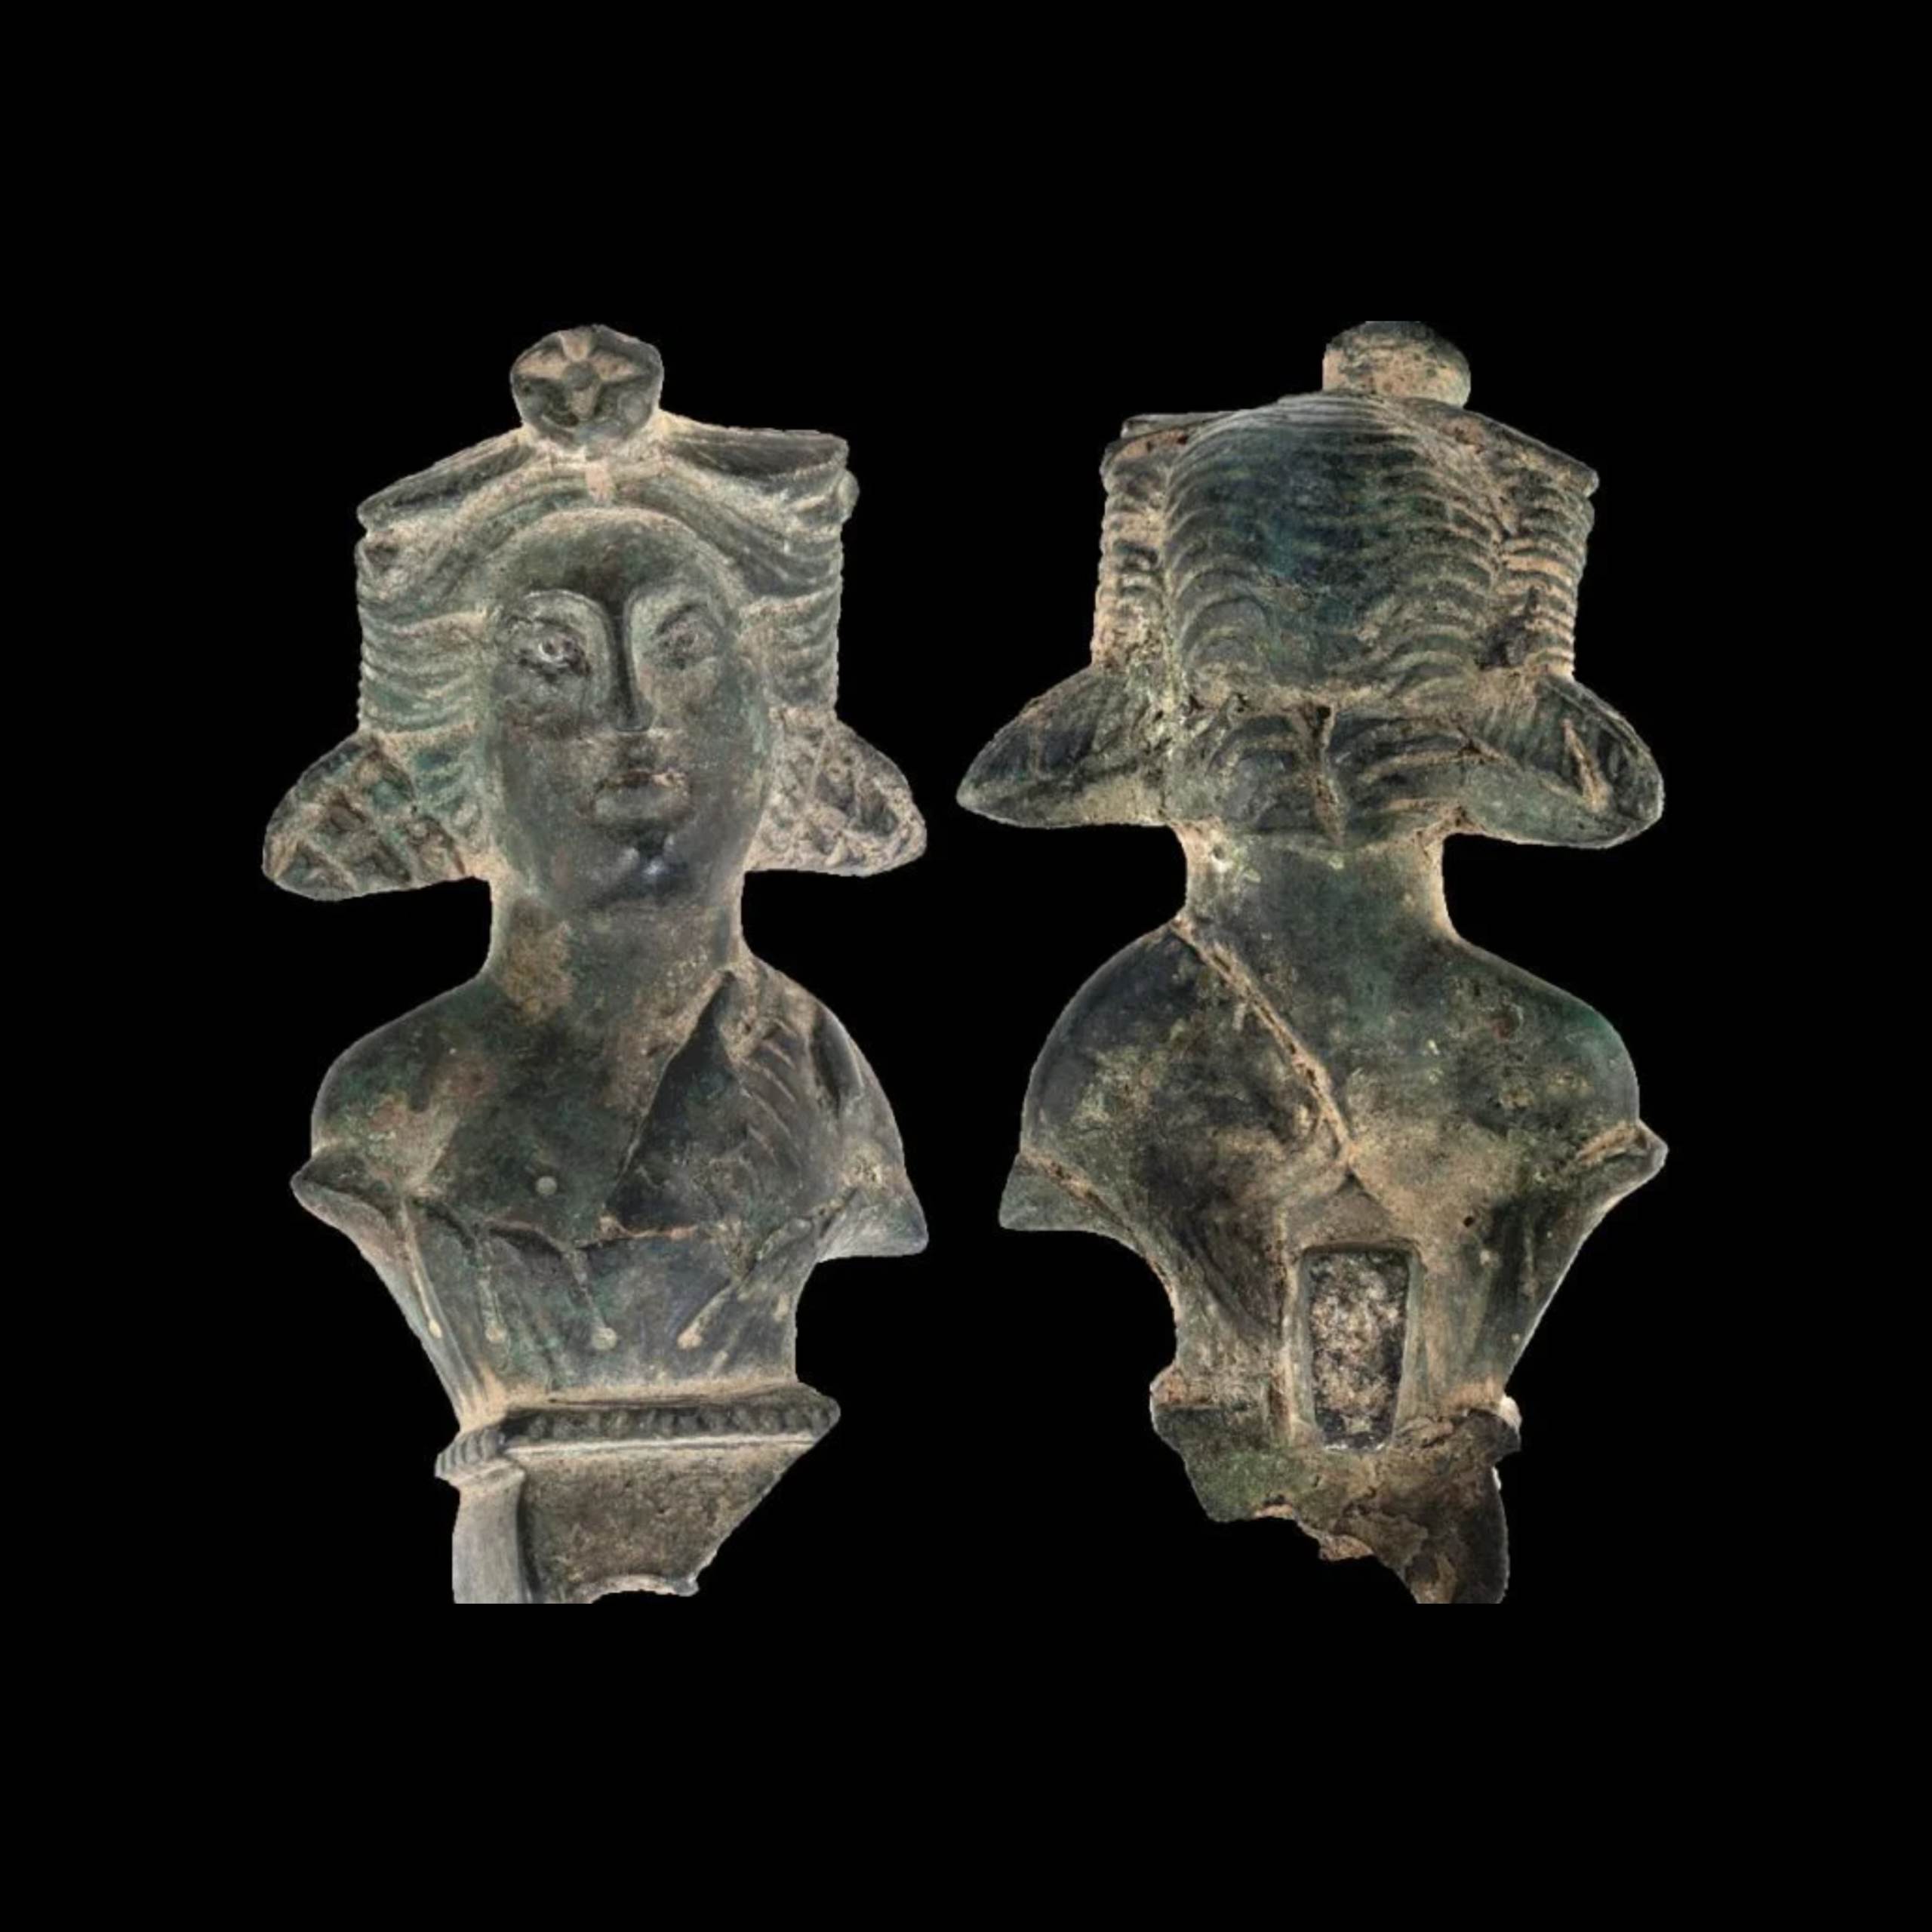 Ancient Egyptian figurines depicting Osiris found in Poland 2